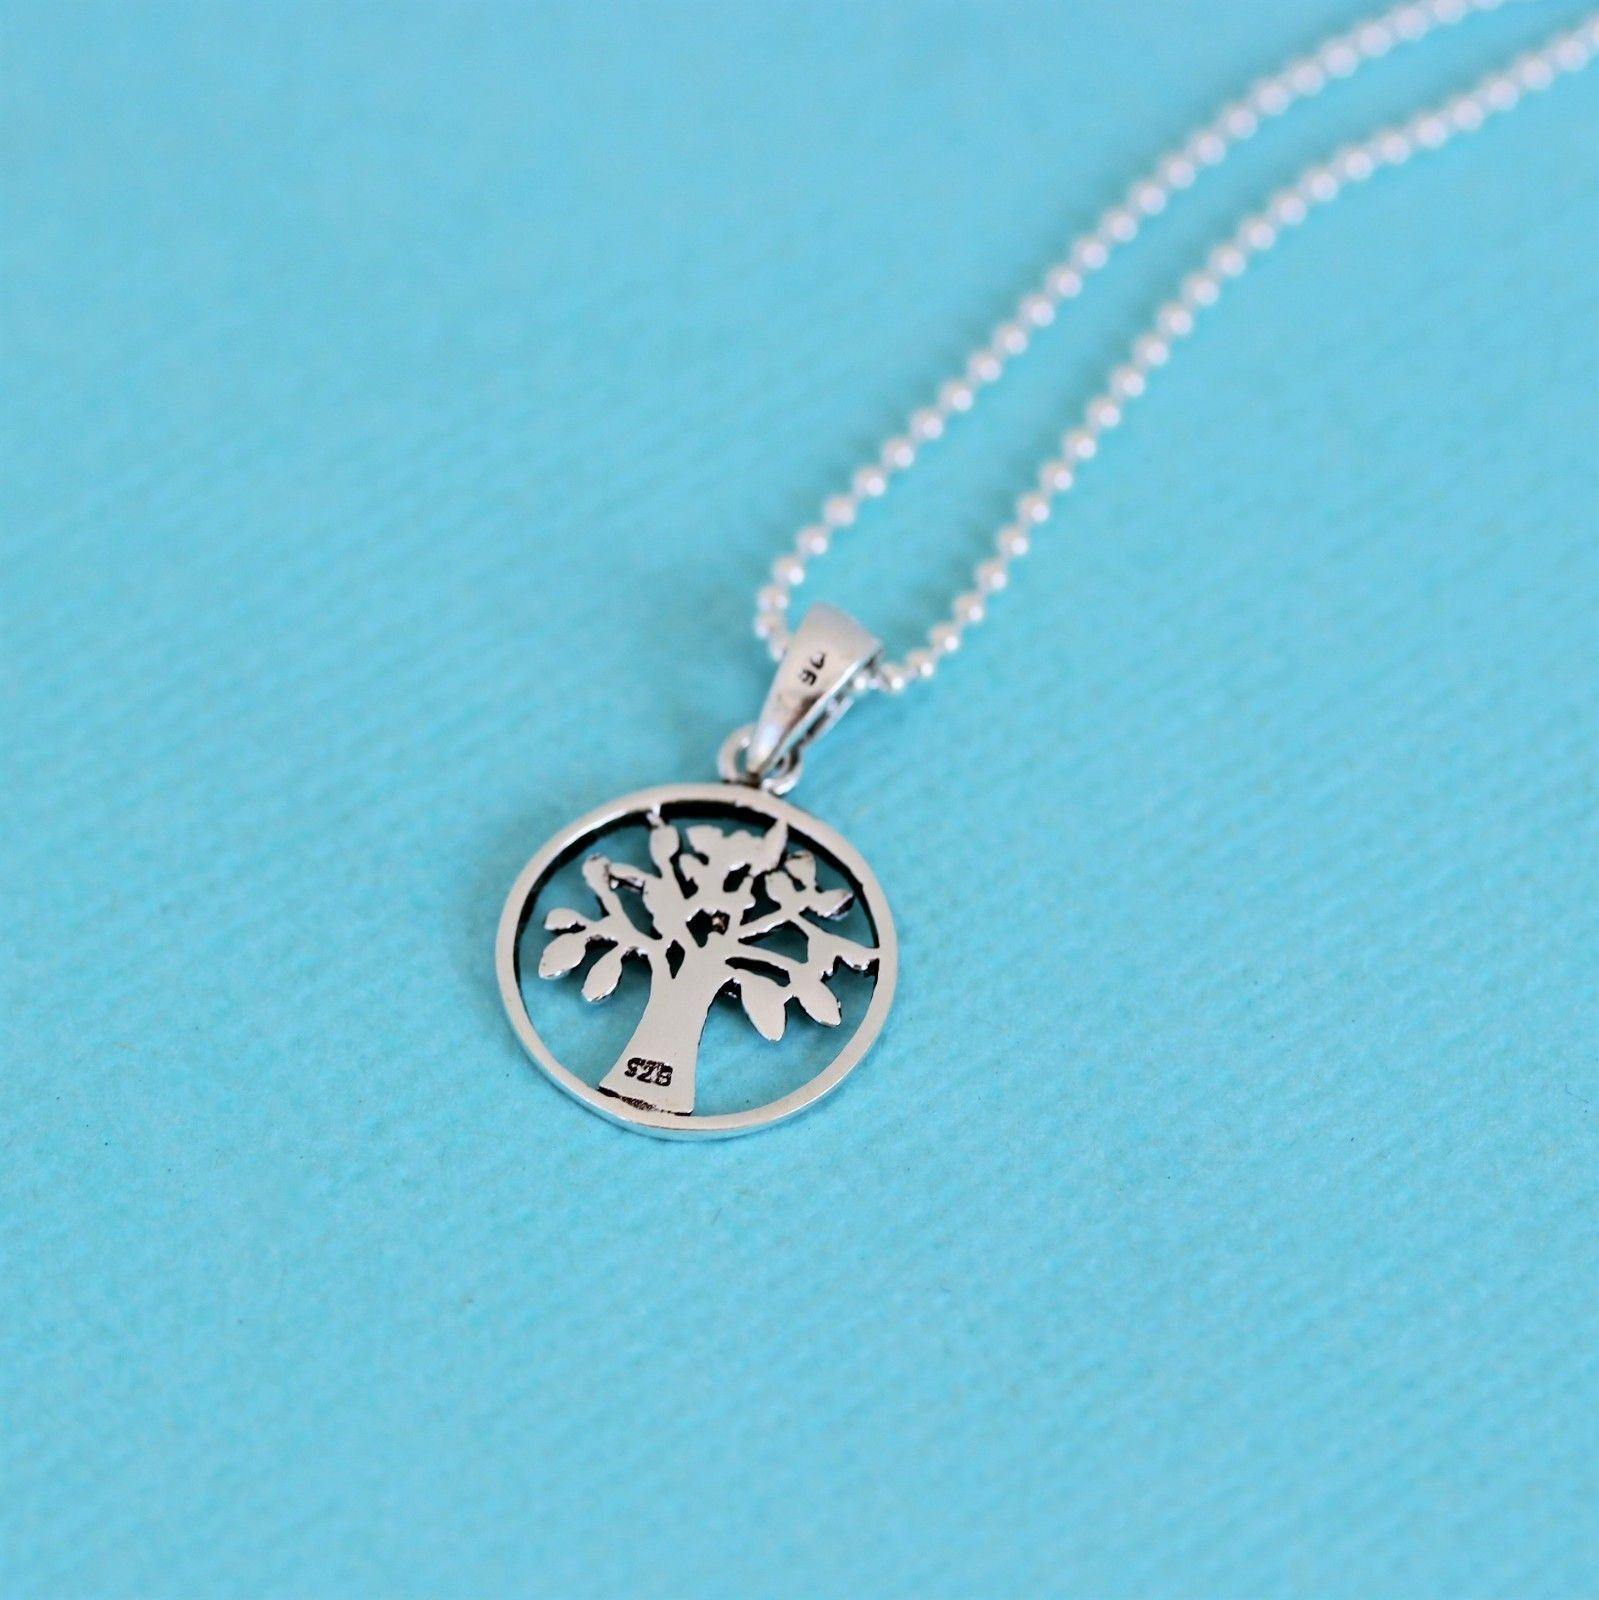 Sterling Silver 13mm Round Tree of Life Necklace 45cm - STERLING SILVER DESIGNS